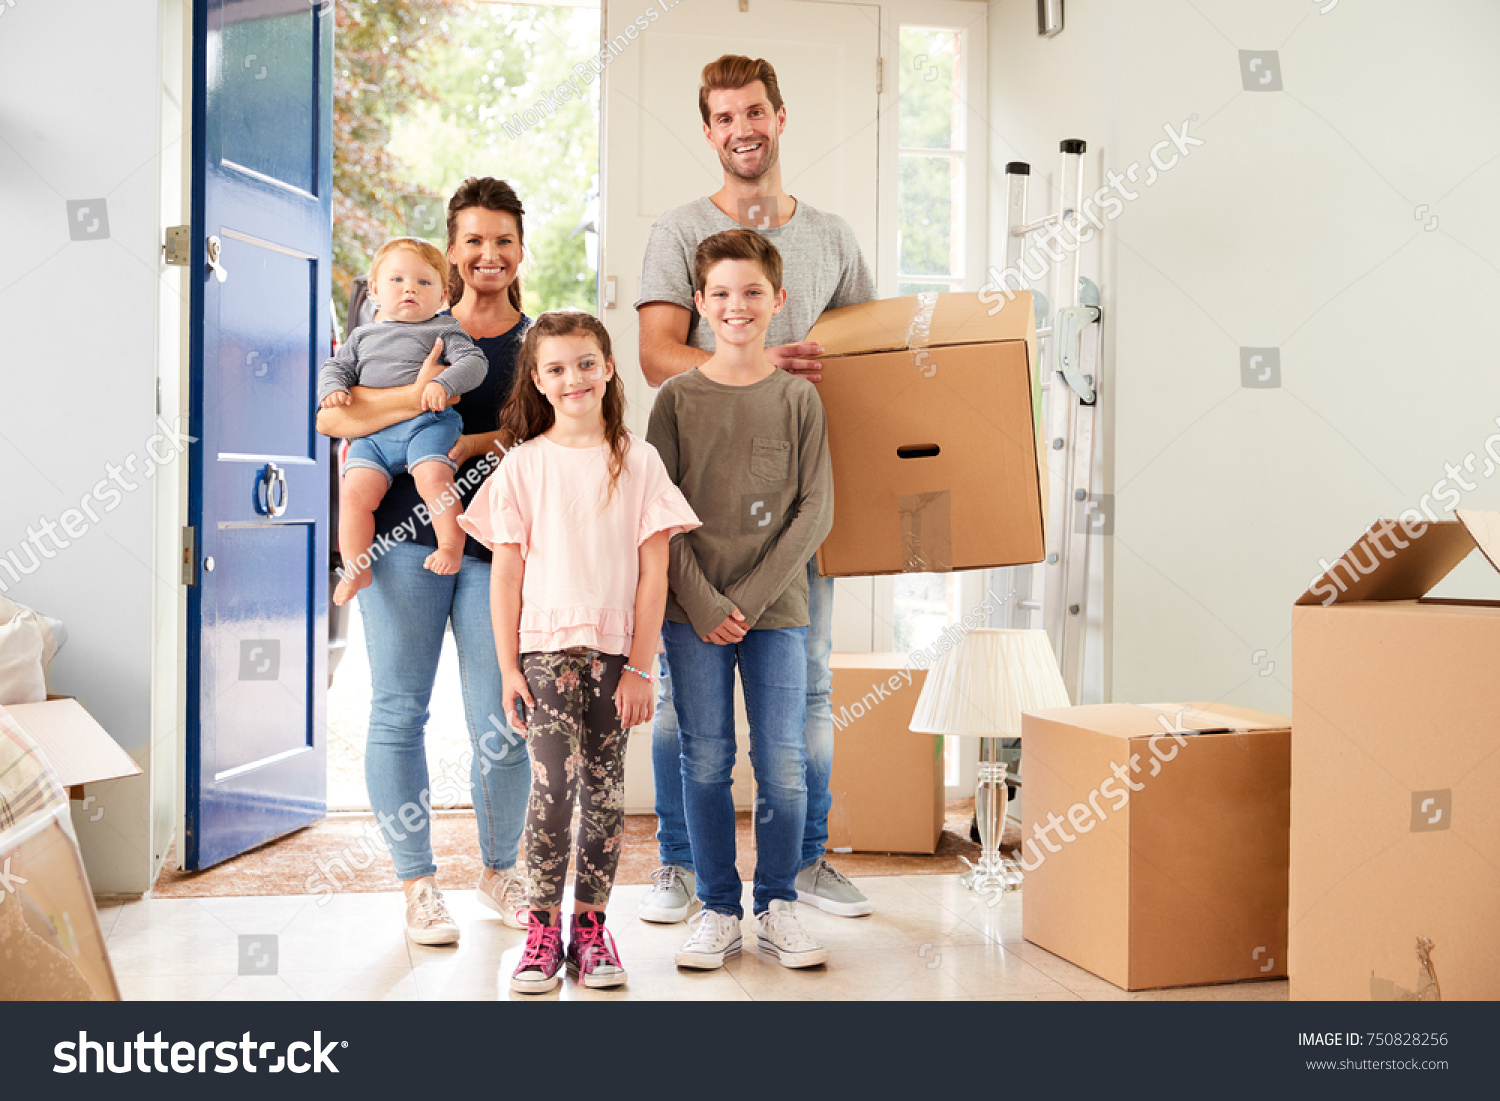 Portrait Of Family Carrying Boxes Into New Home On Moving Day #750828256